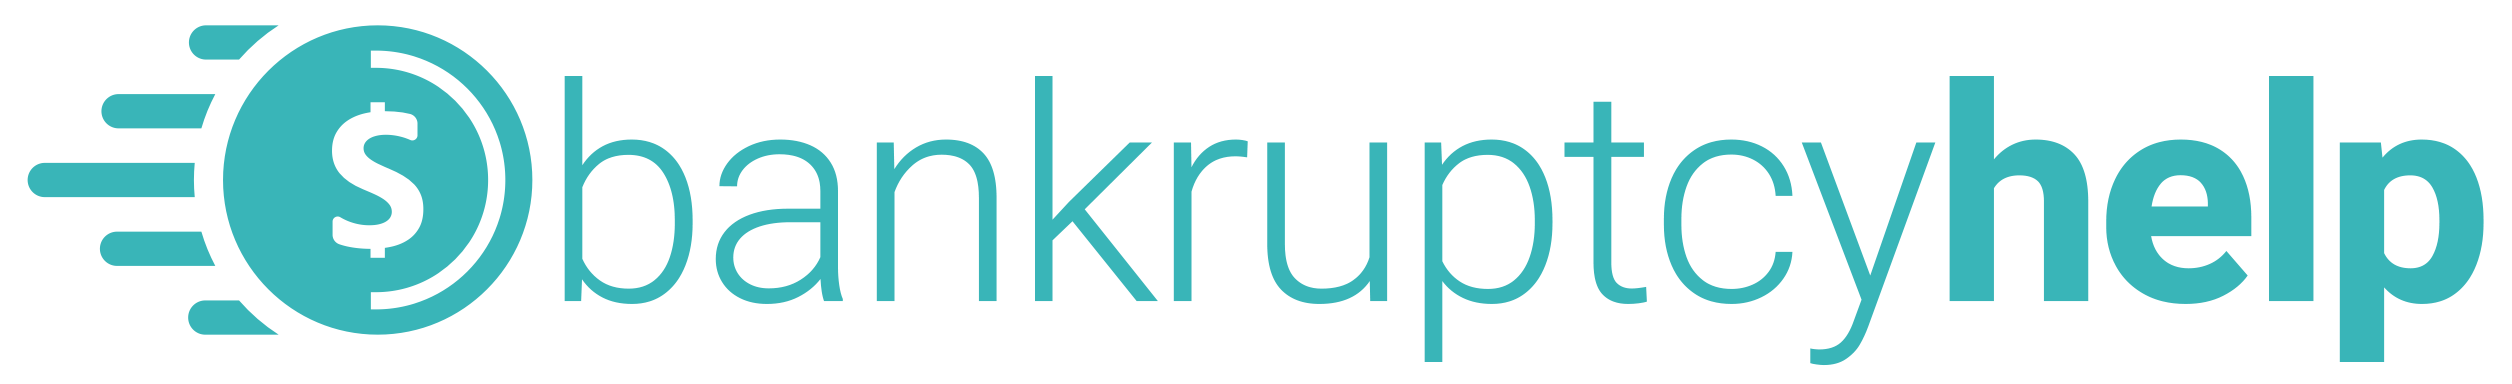 bankruptcy-logo-colored